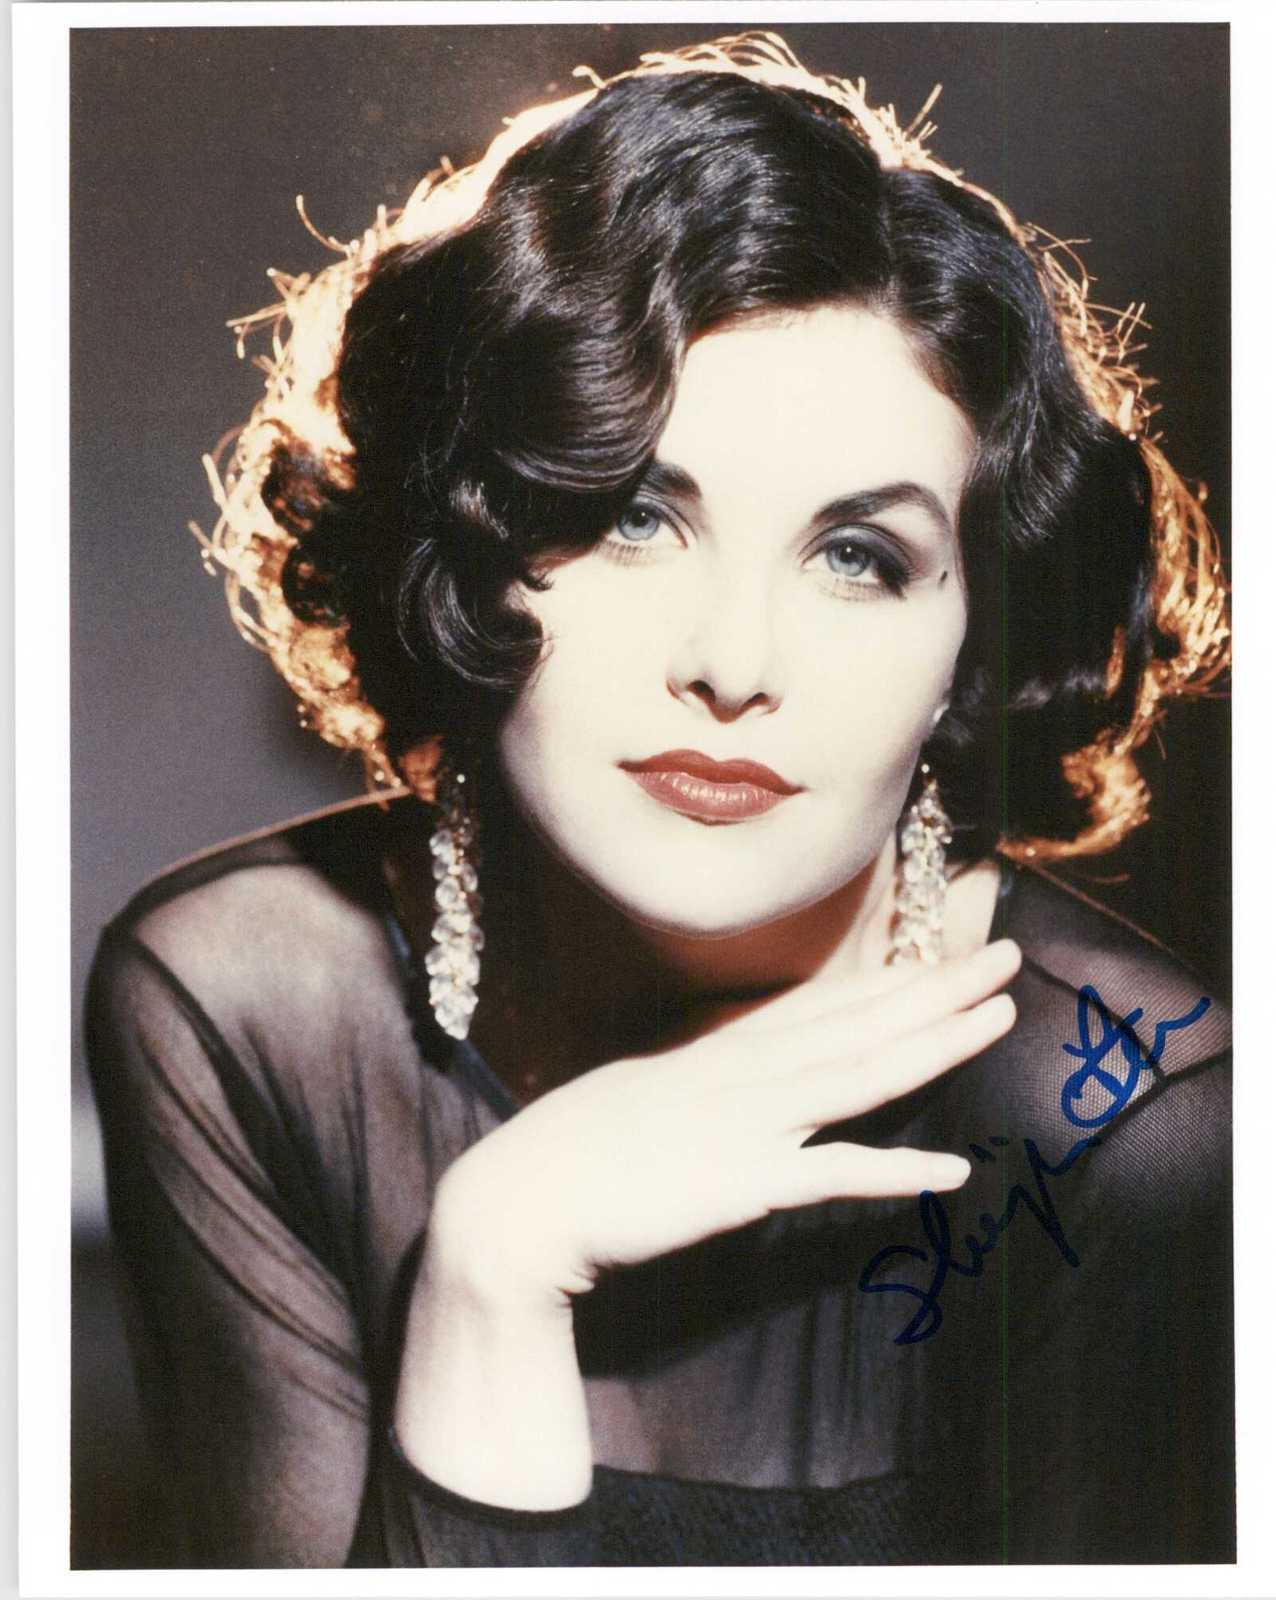 Show full-size image of Sherilyn Fenn Signed Autographed Glossy 8x10 Photo.